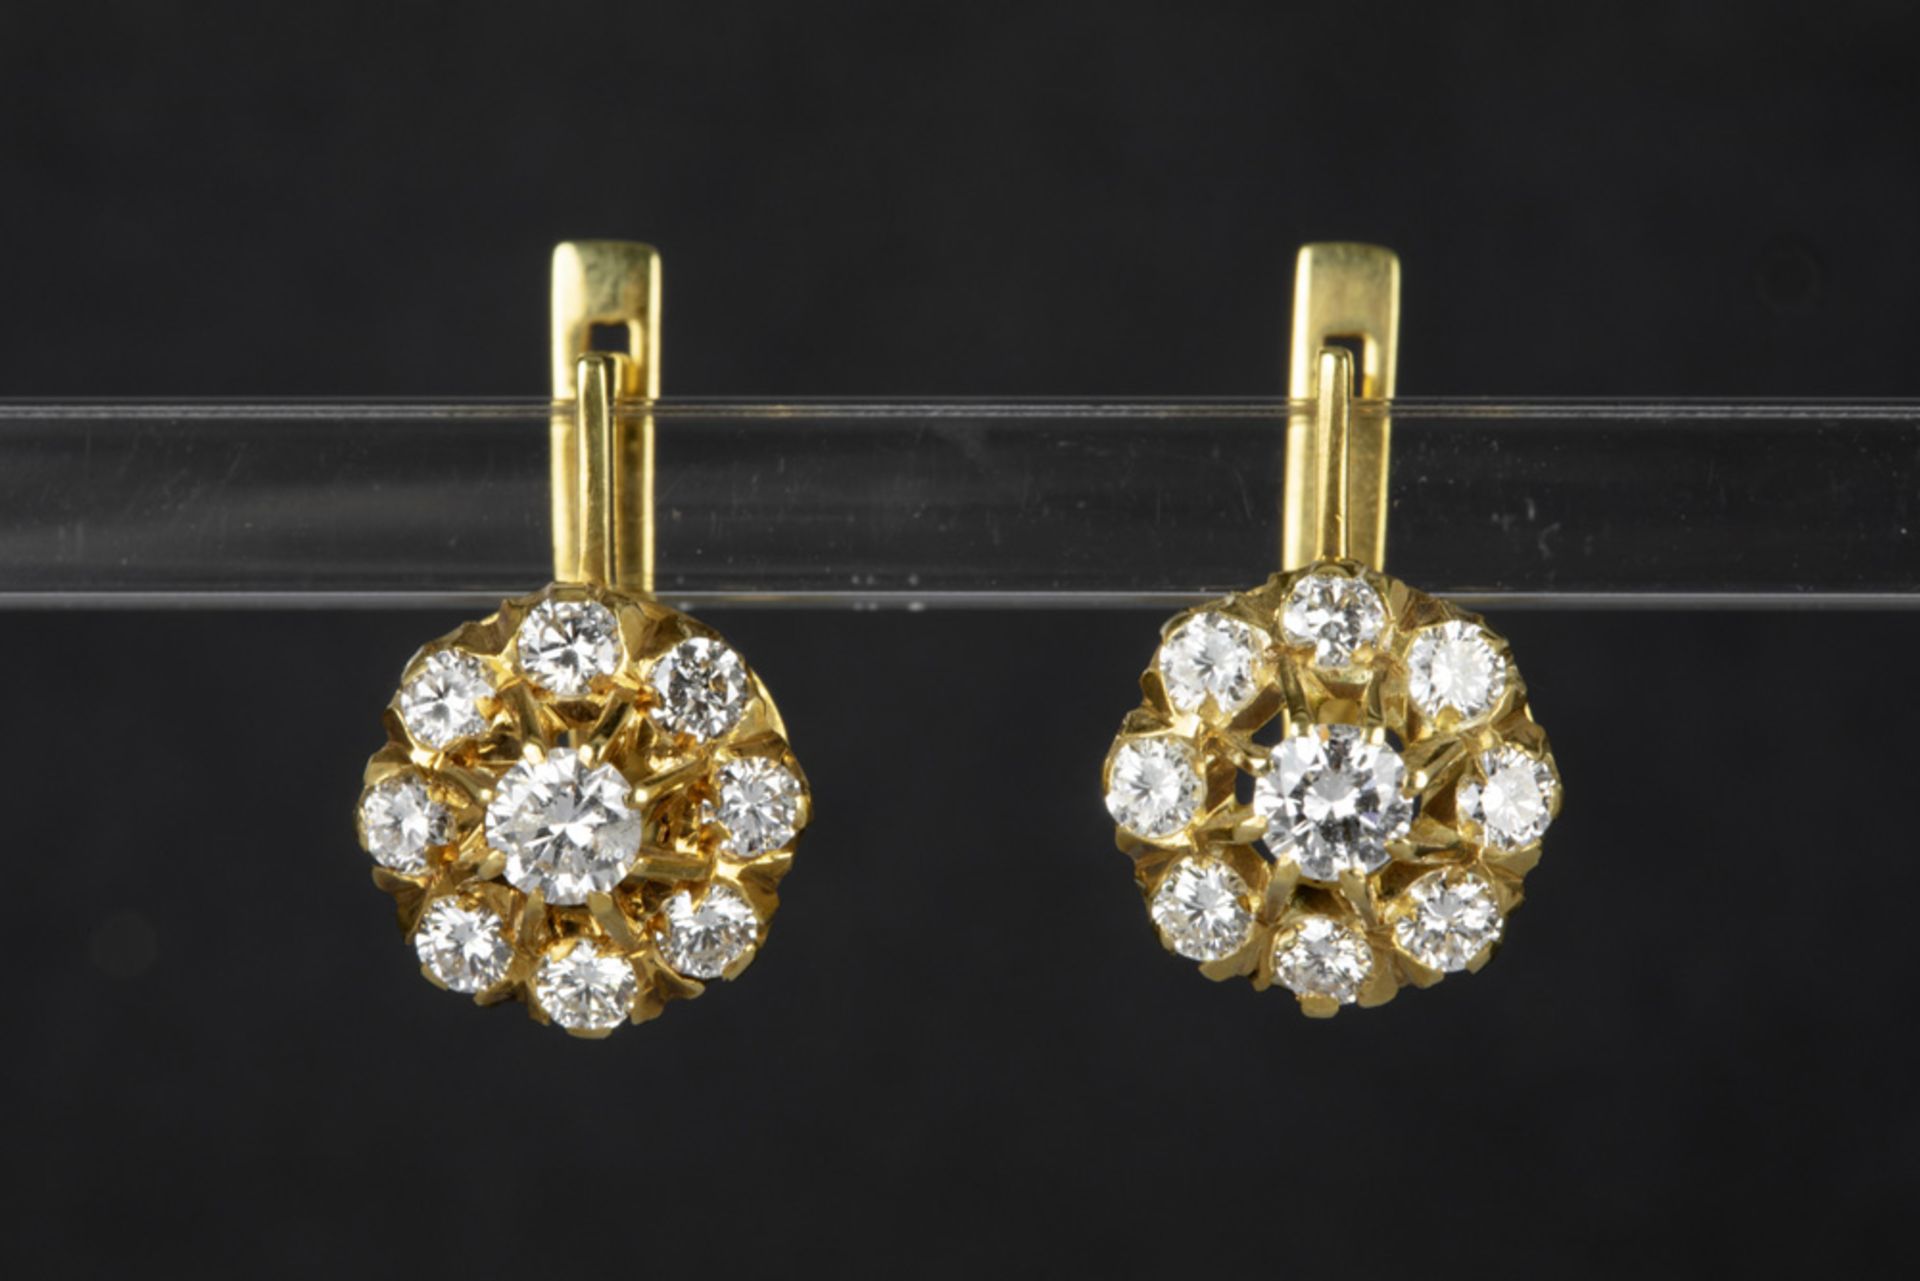 pair of vintage earrings in yellow gold (18 carat) with ca 1,20 carat of high quality brilliant